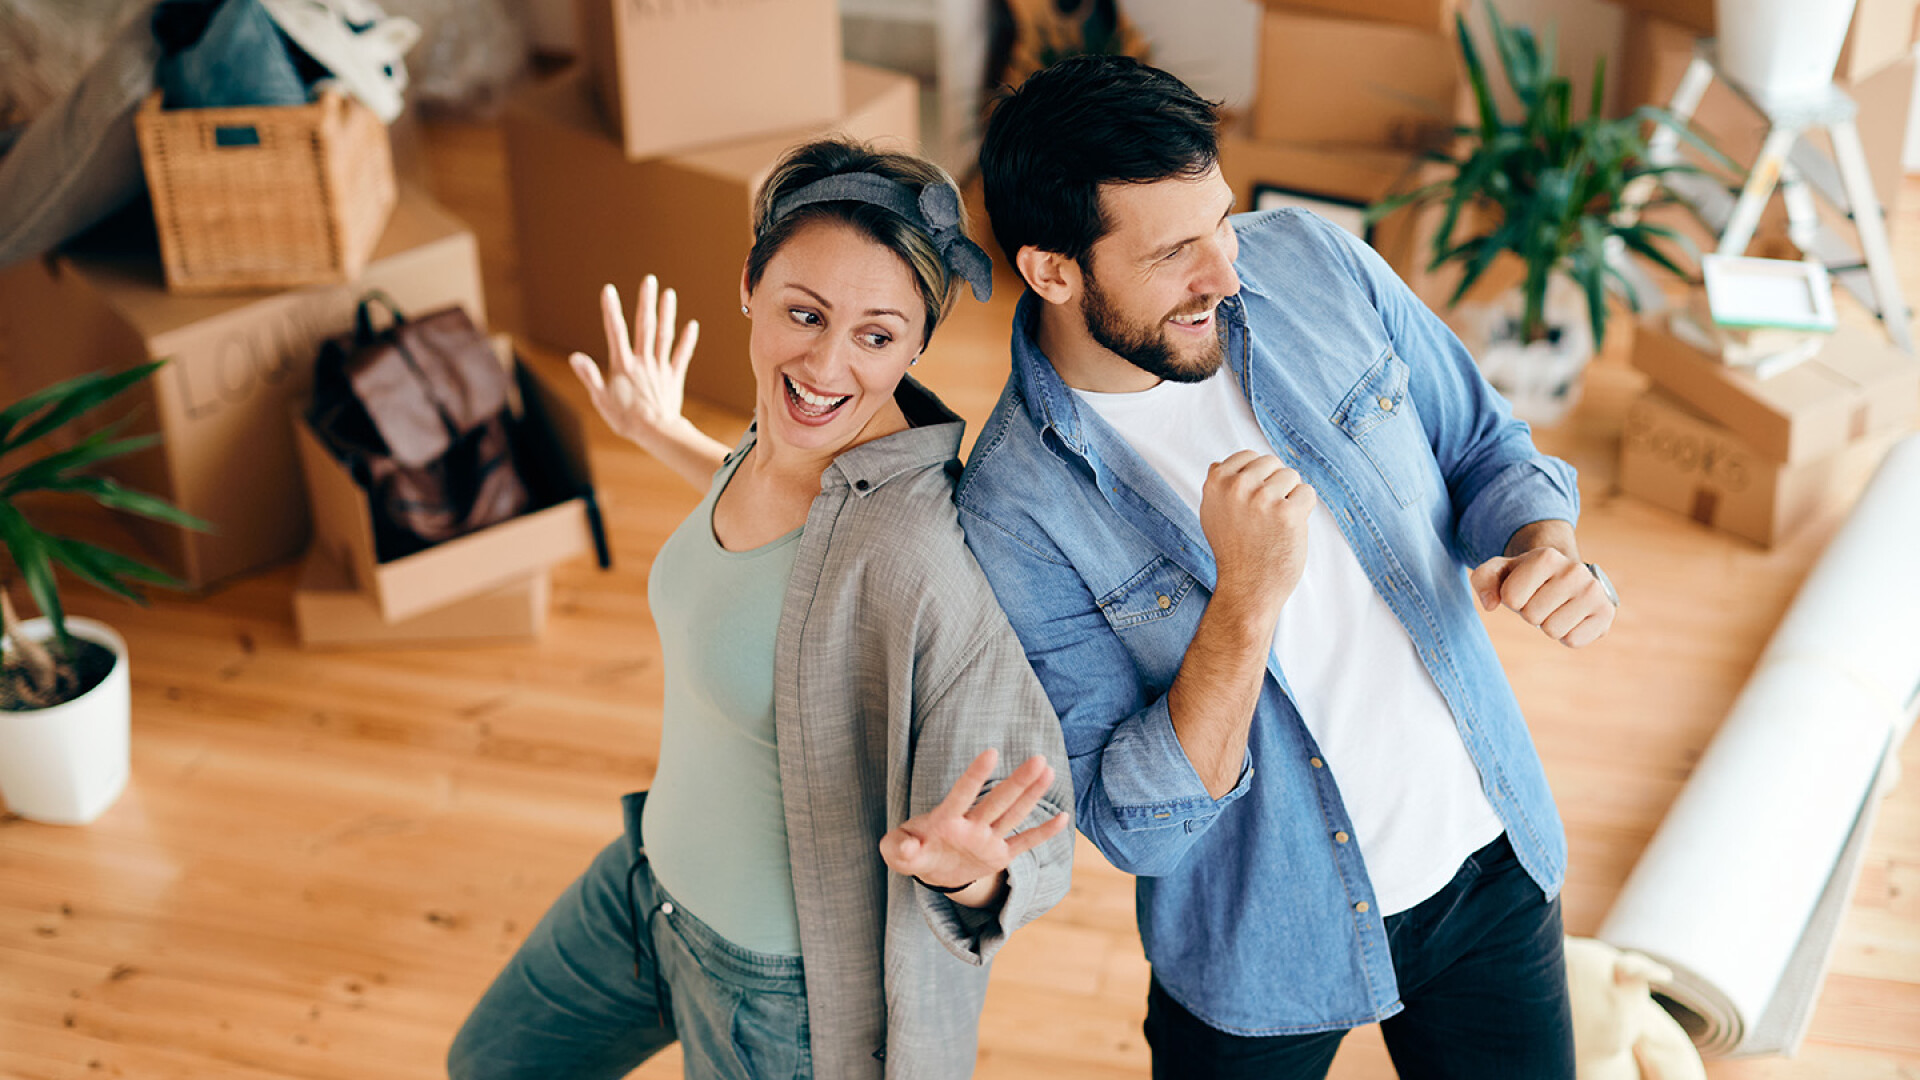 Carefree couple having fun- dancing after moving into new home